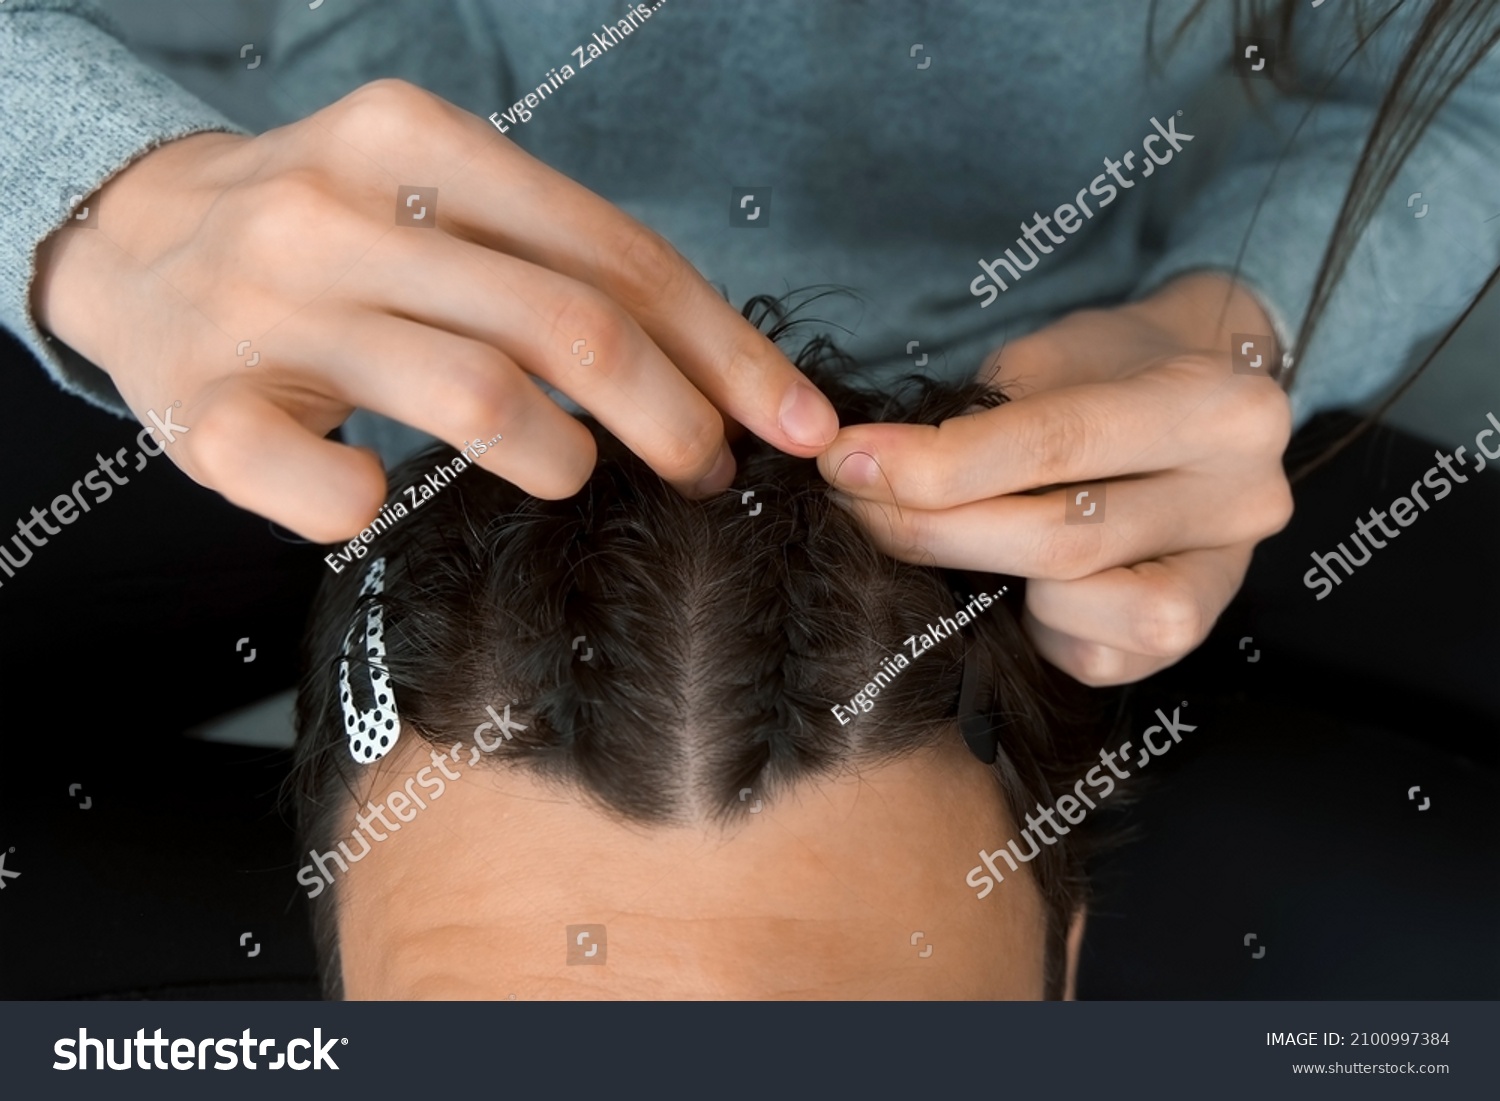 Woman is doing french braid on short men's hair, closeup view. She is doing a man's hair while sitting at home on the couch. Evening of a young married couple together. #2100997384